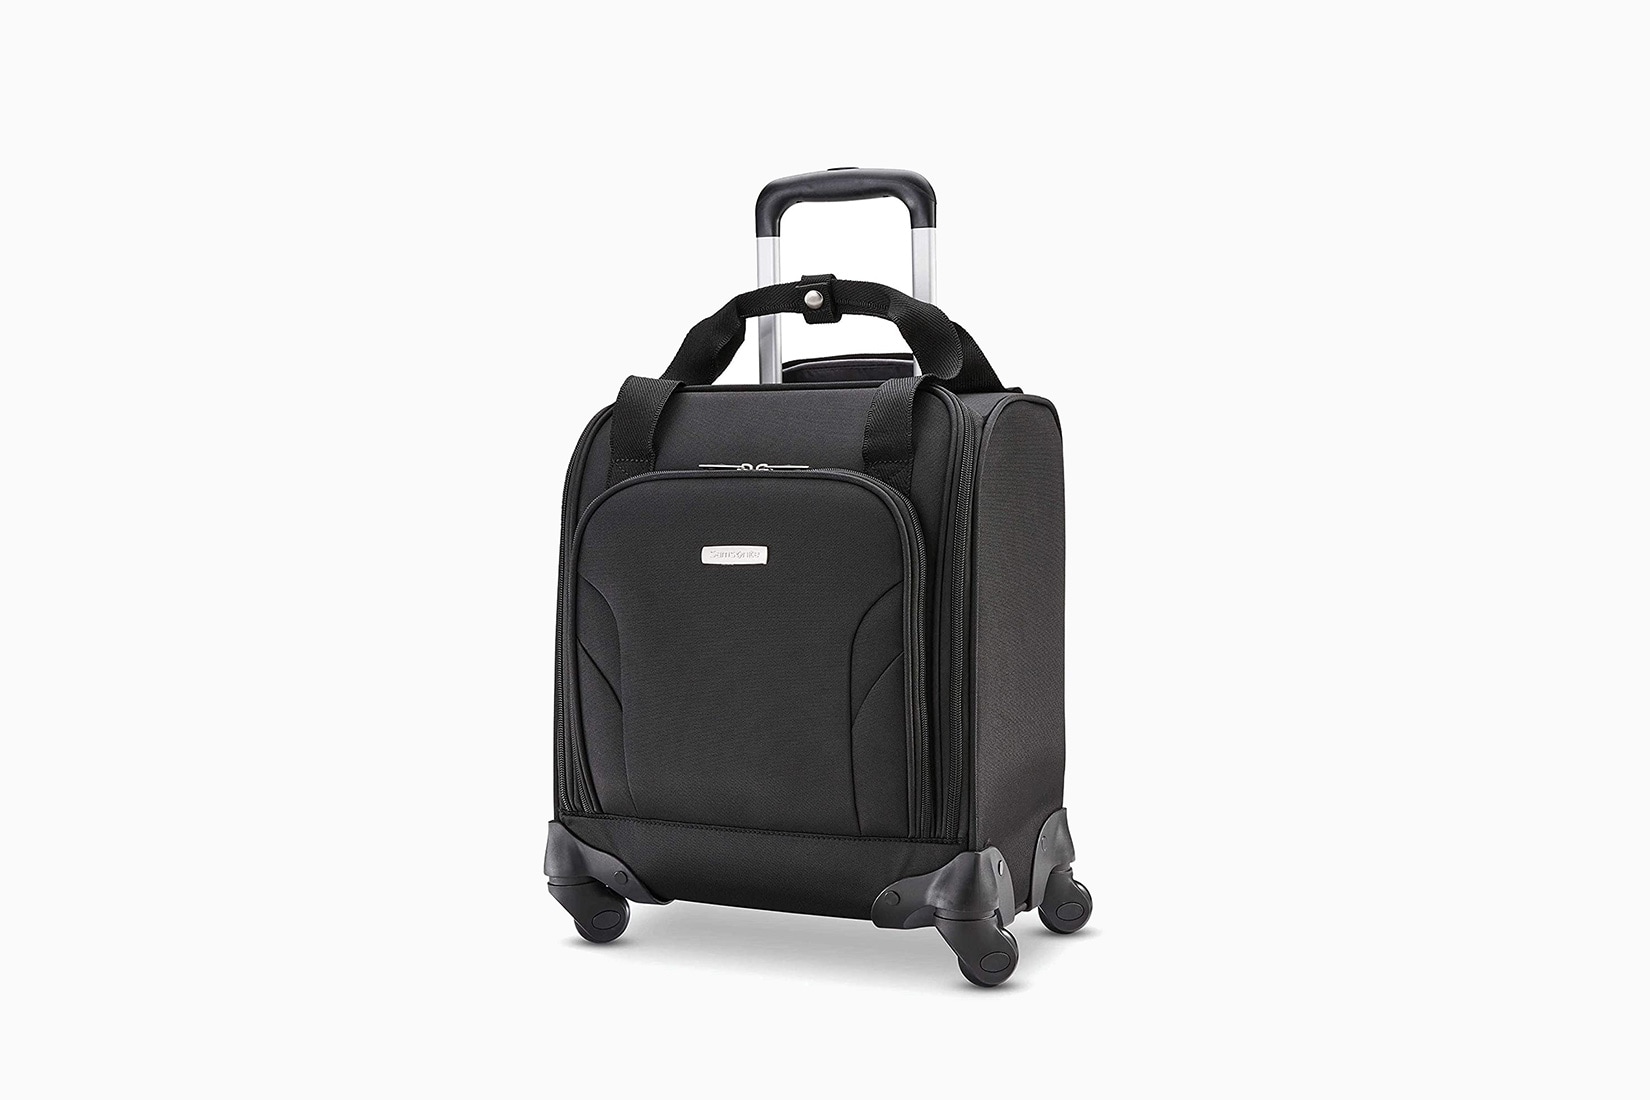 best carry-on luggage travel business trip samsonite - Luxe Digital